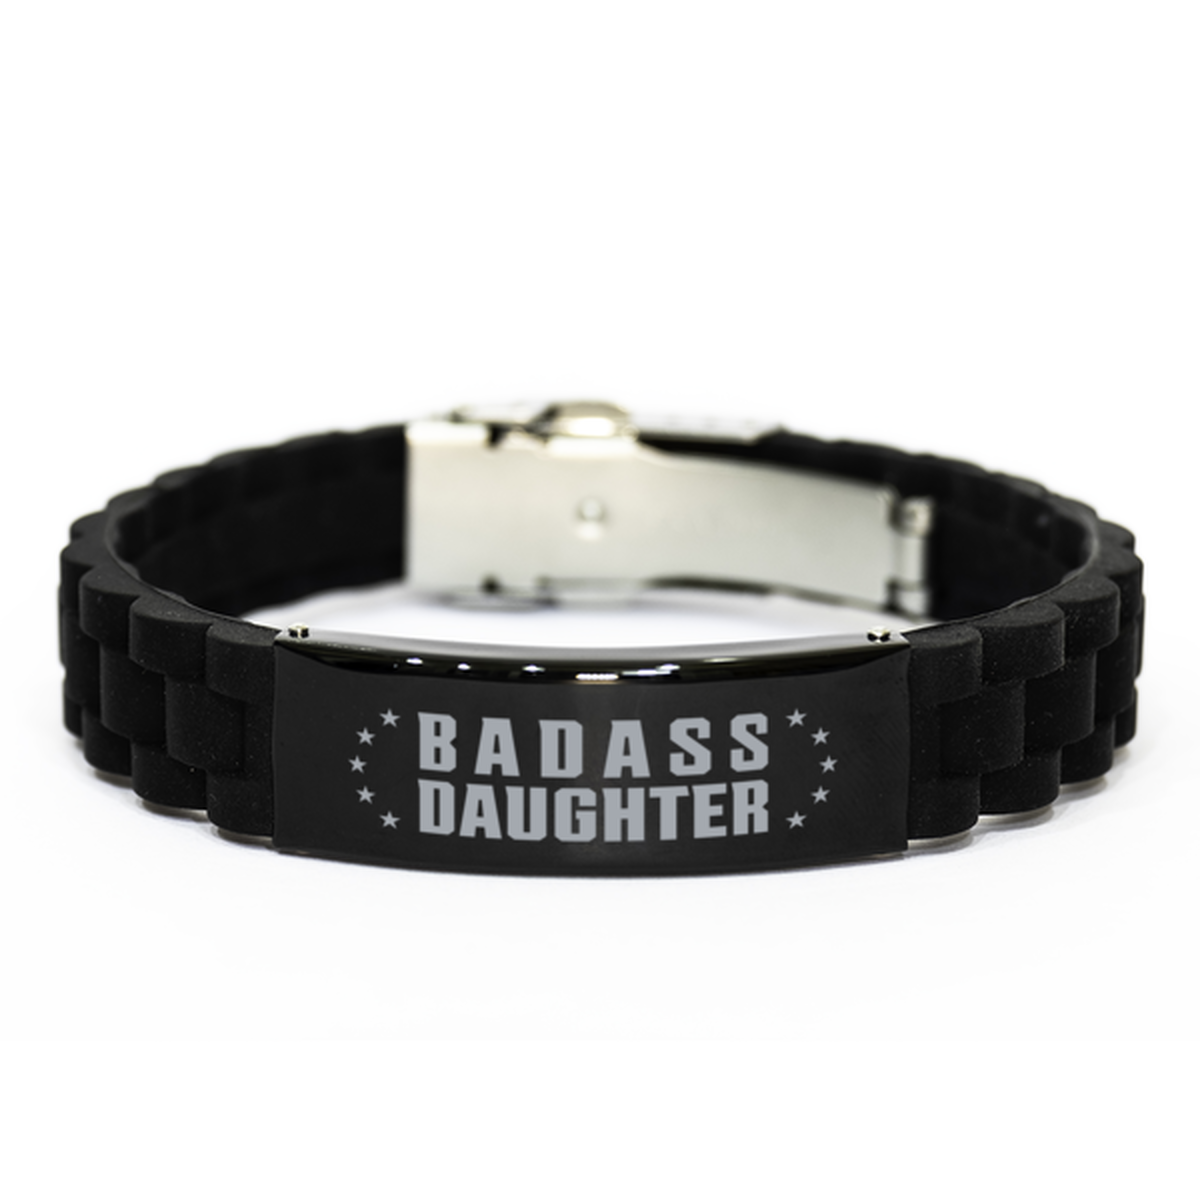 Daughter Black Bracelet, Badass Daughter, Funny Family Gifts For Daughter From Mom Dad